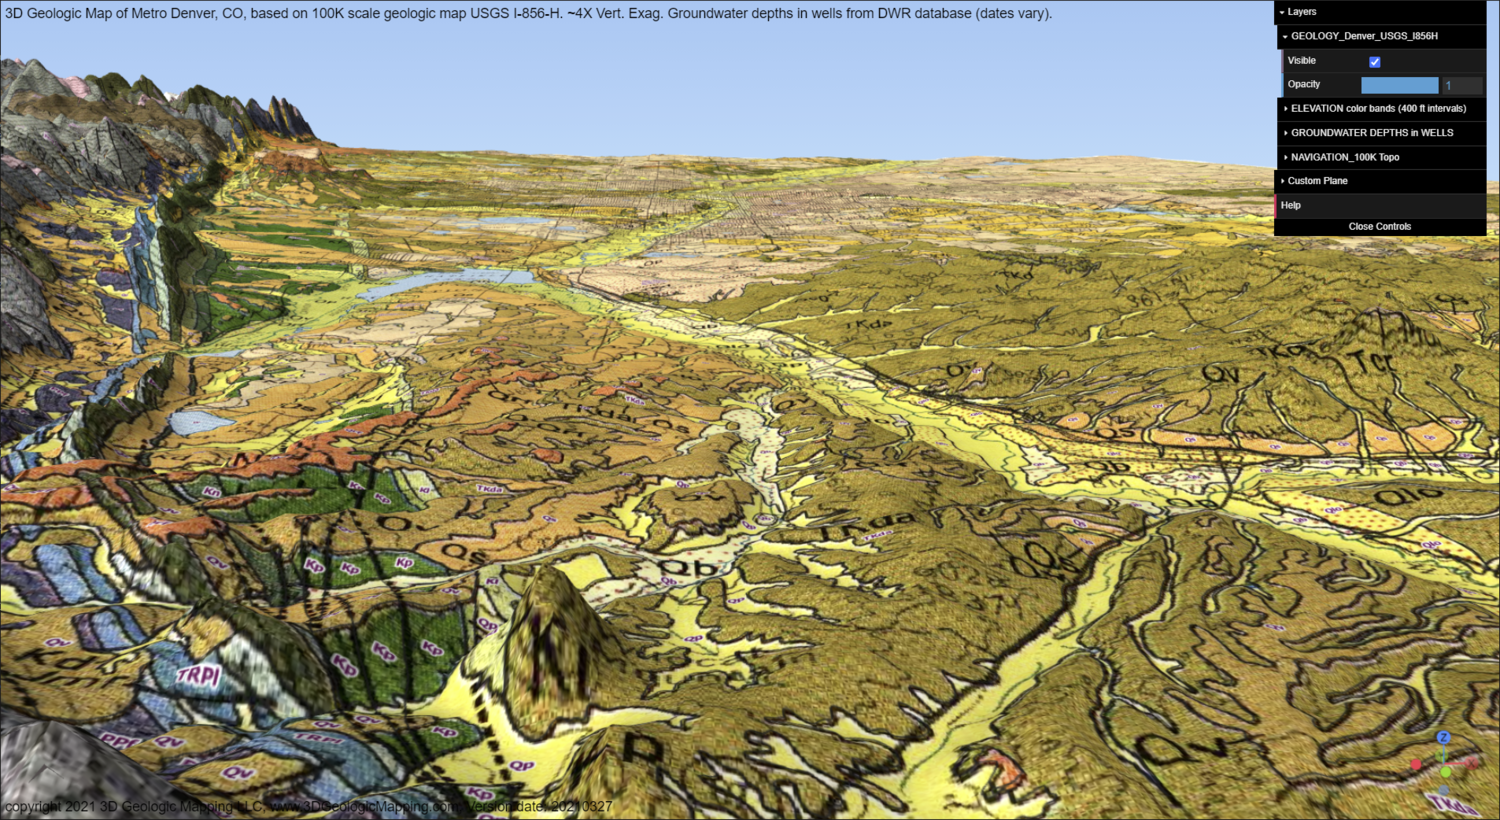 Generalized 2D and 3D Geologic Maps of Metro Denver (based on USGS I-856-H) plus groundwater depths, over entire metro area.